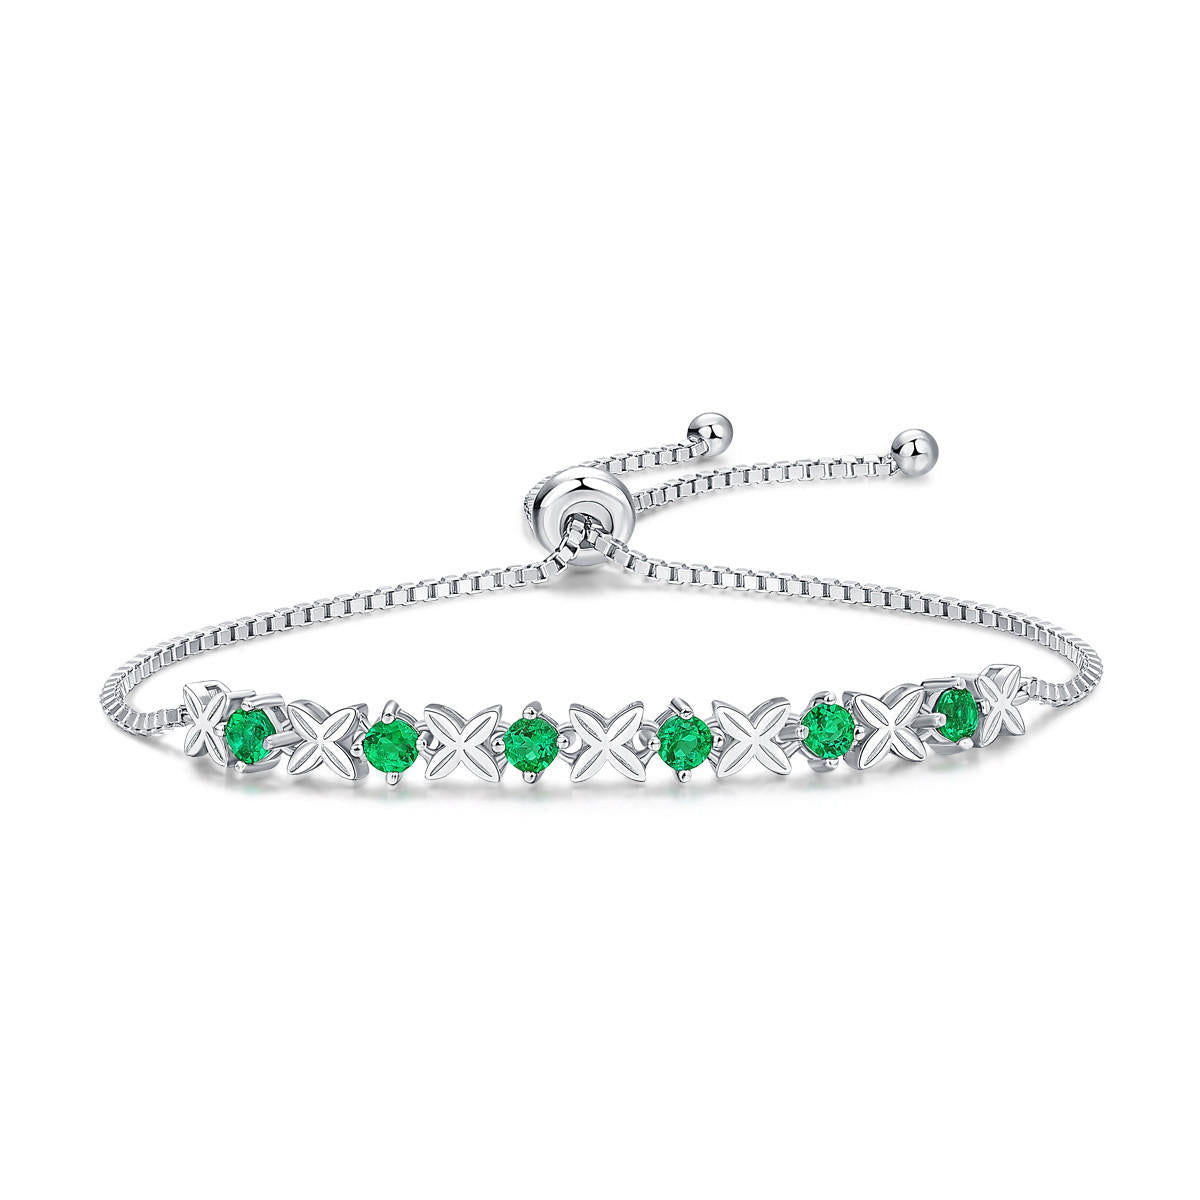 Emerald 925 Sterling Silver Bracelet With Clasp